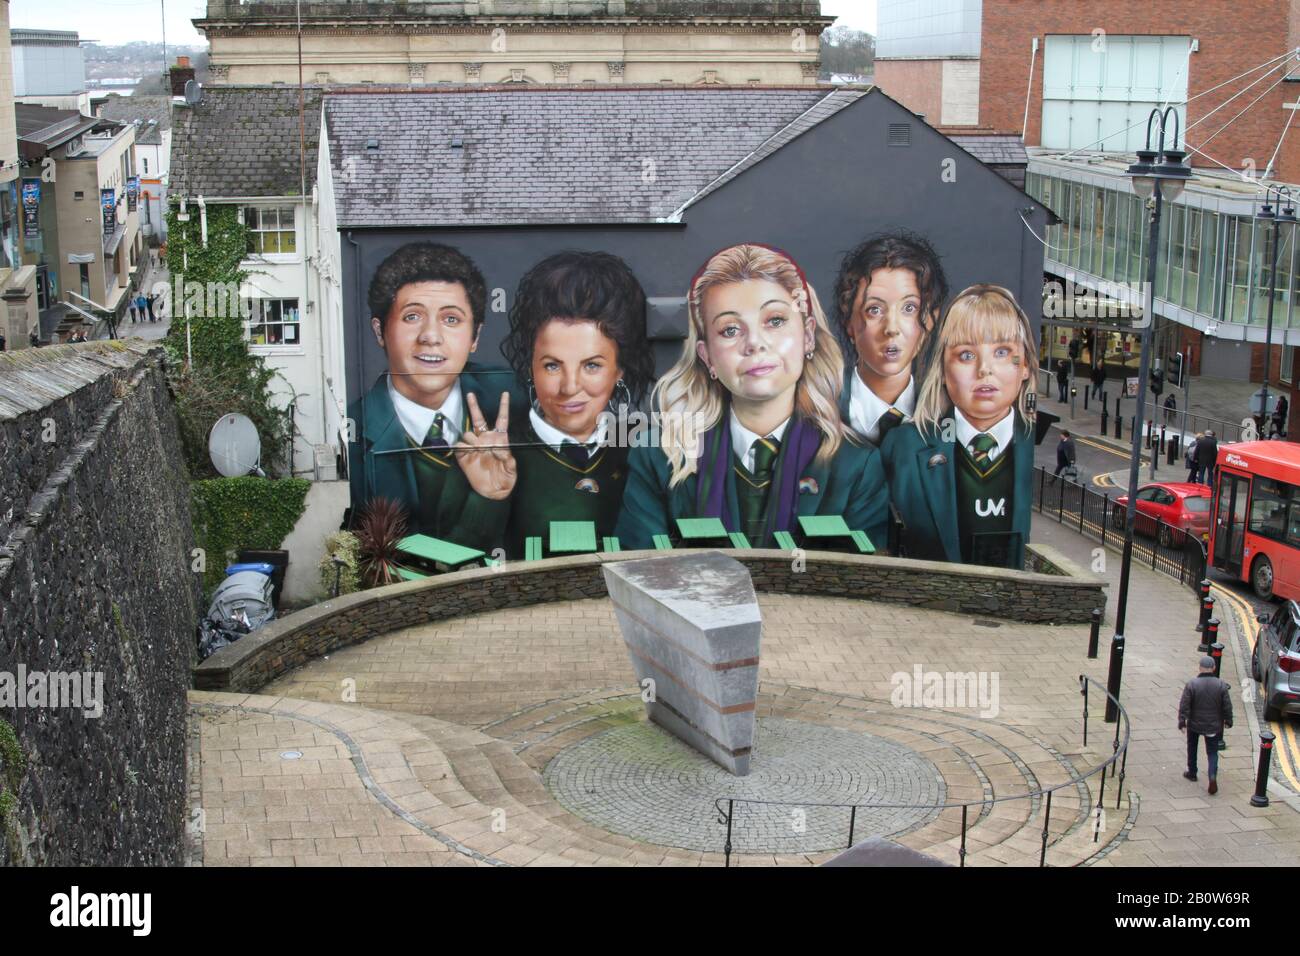 Large-scale colourful mural of Derry Girls TV characters painted in central Derry, Northern Ireland. Stock Photo